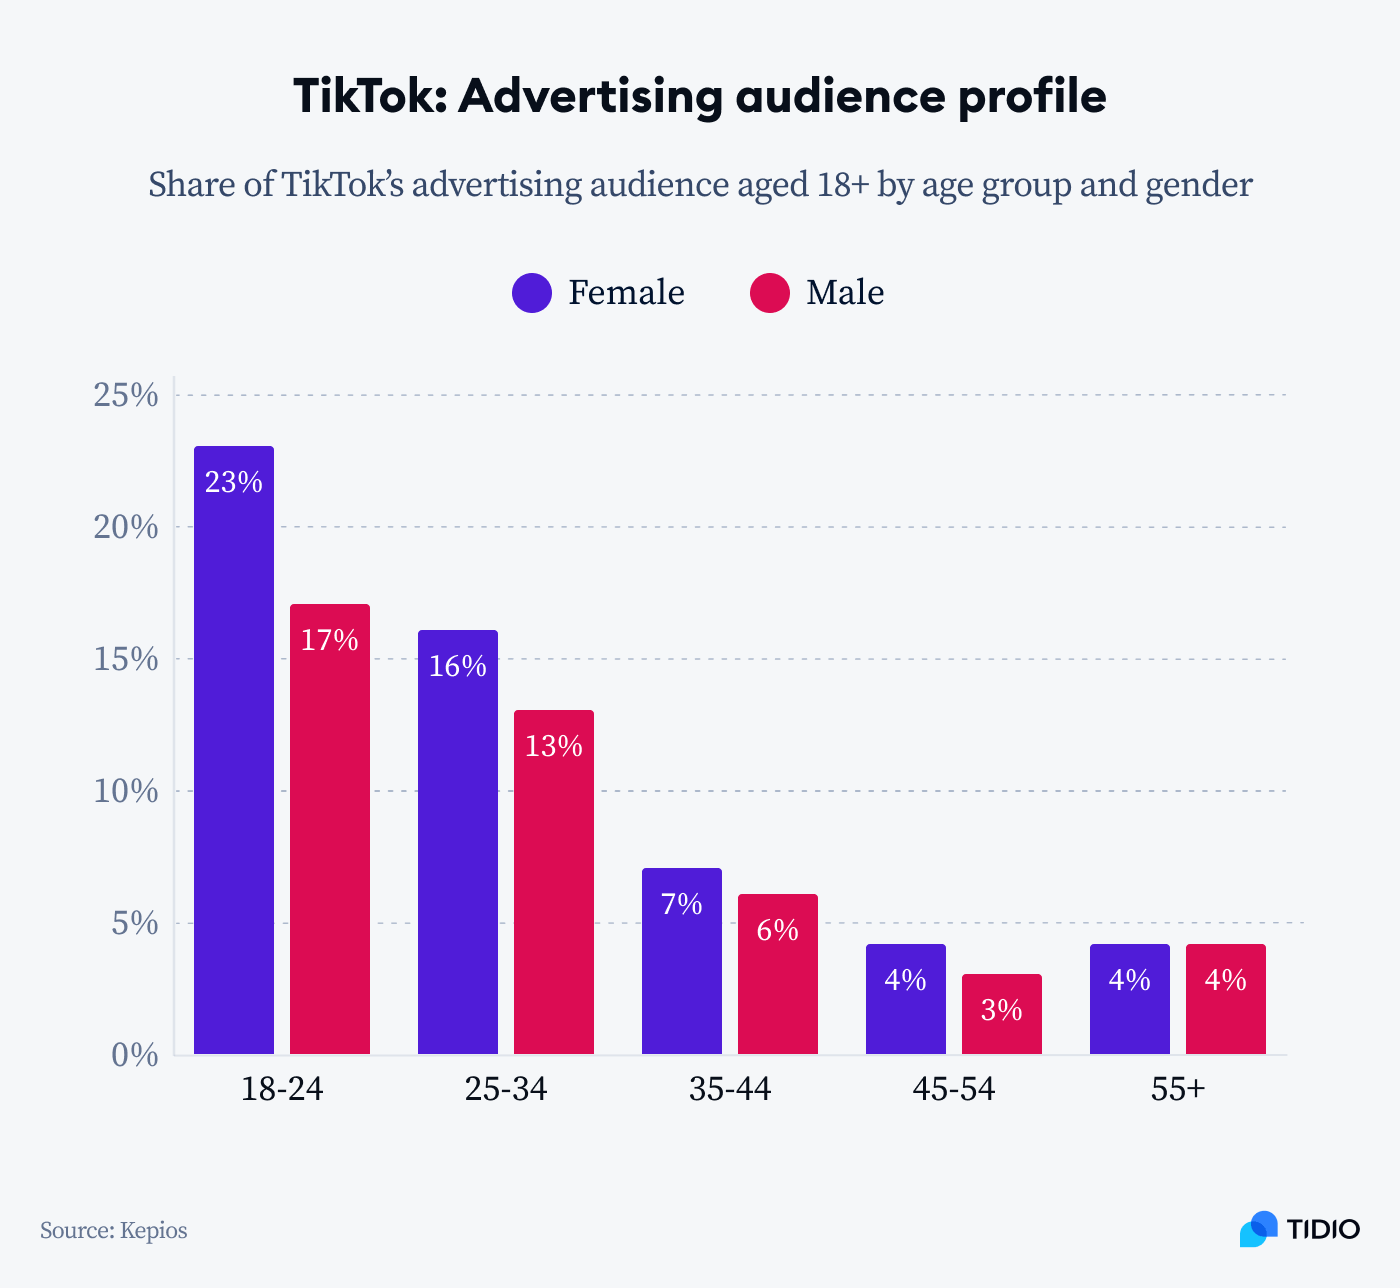 https://www.tidio.com/wp-content/uploads/advertising-audience-profile.png